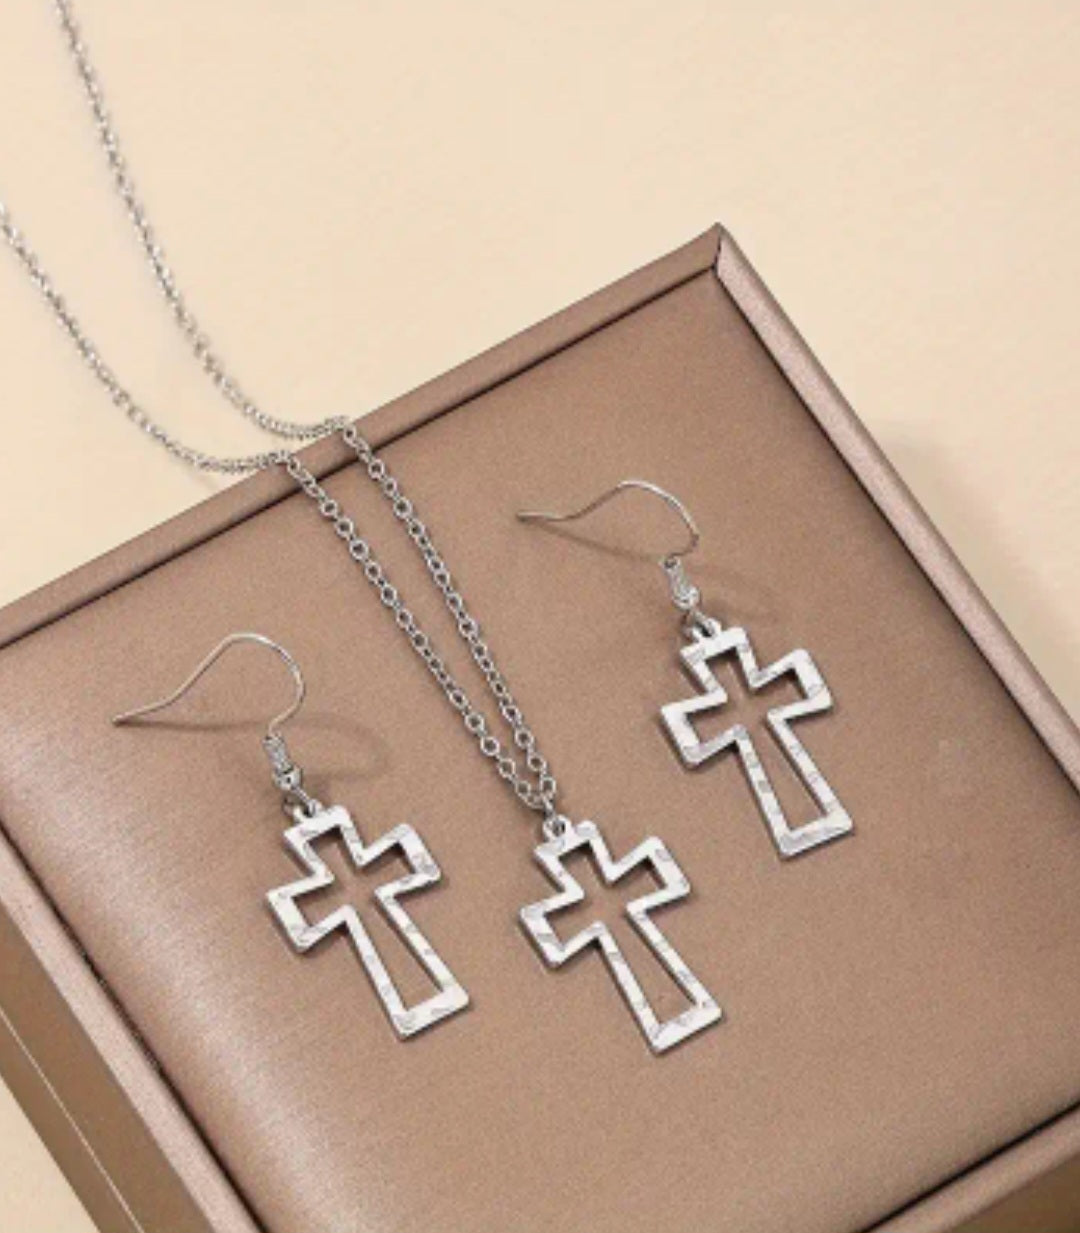 Hollow cross necklace